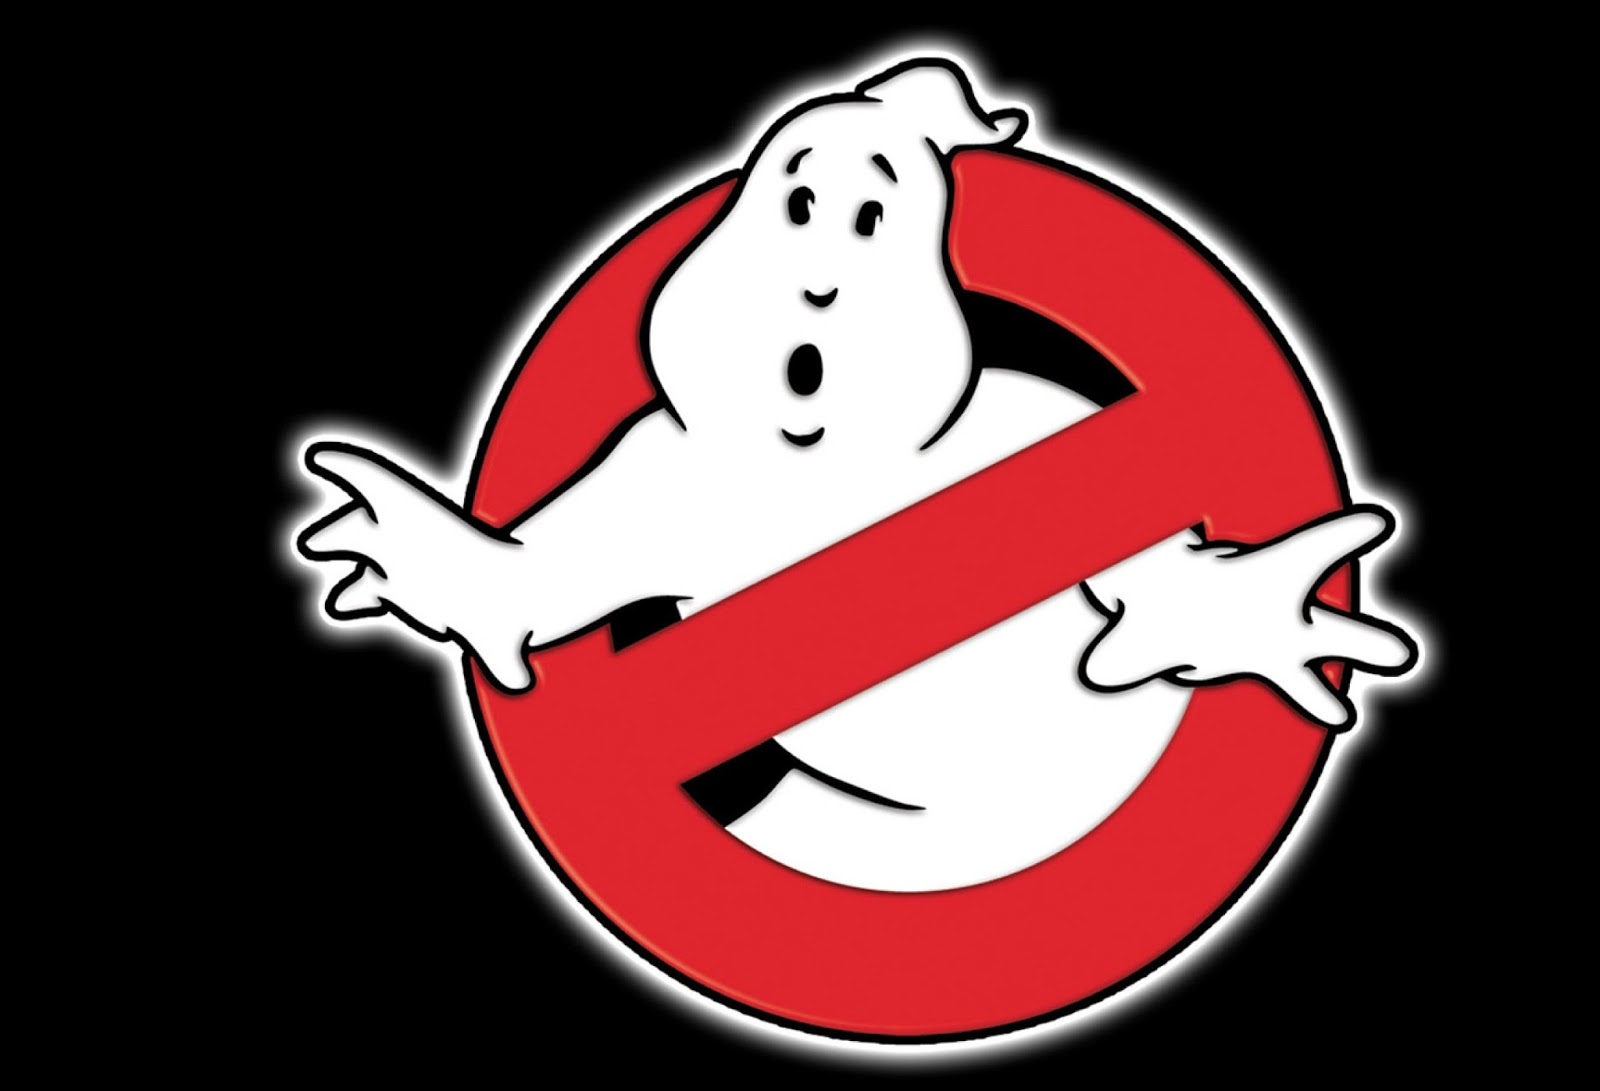 MOVIES: Ghostbusters - News Roundup